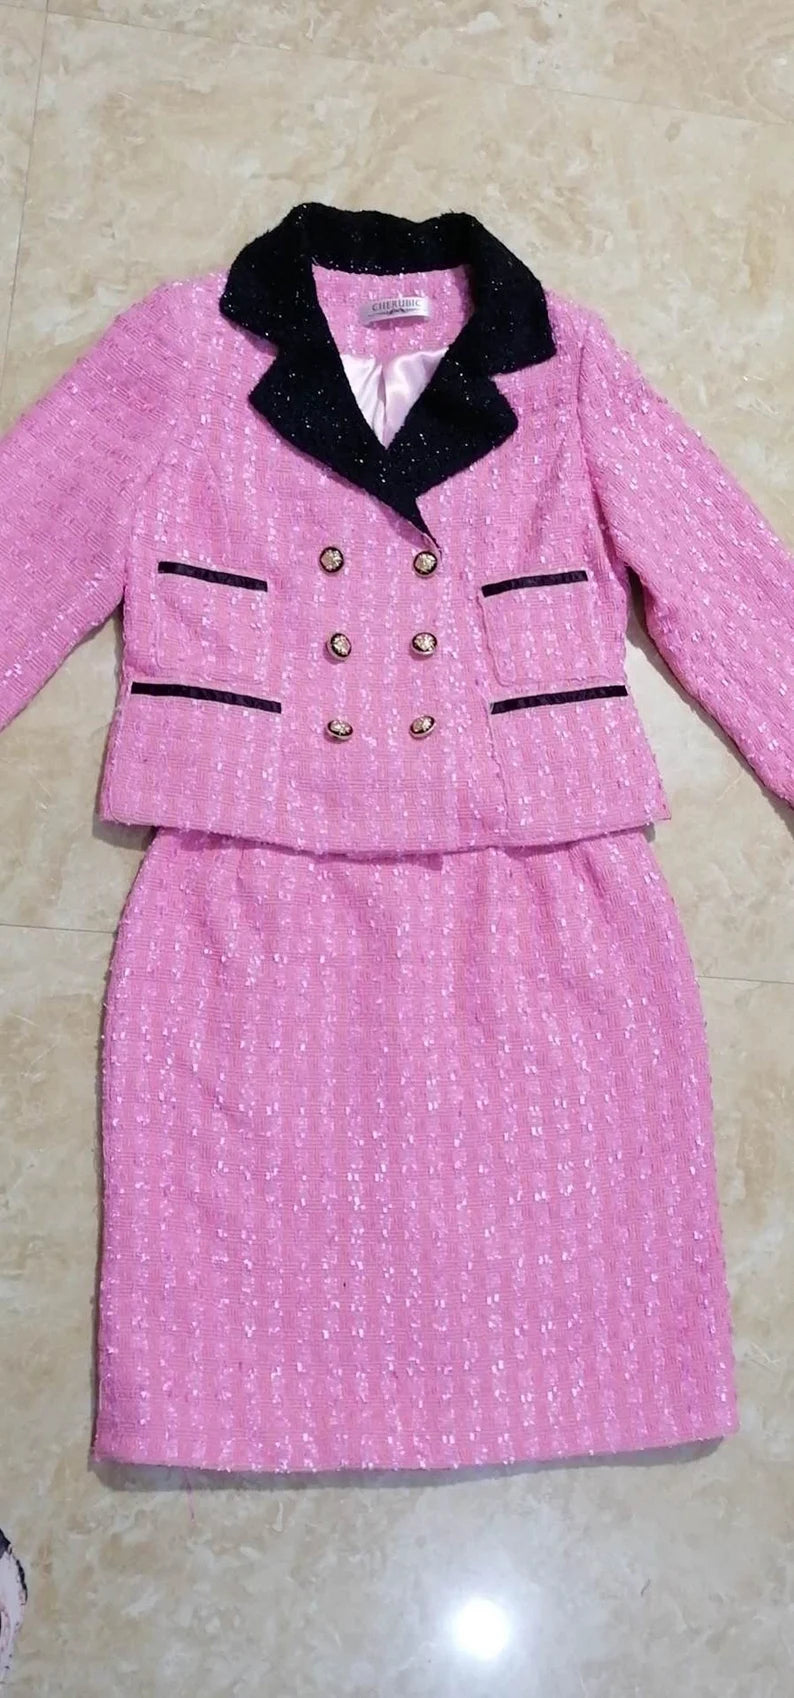 Women Custom made Hot Pink Vintage Style Tweed Suit Jacket Coat for Women  UK CUSTOMER SERVICE!  CUSTOM MADE Blazer + Shorts/Skirts/Trousers Sequinned Jacket Coat for Women, Can worn for ceremony, Inauguration , Party, Night Out and Evening Friends with Dinner. No Machin washable. We offer Shorts, Skirts, Trousers for the suit.